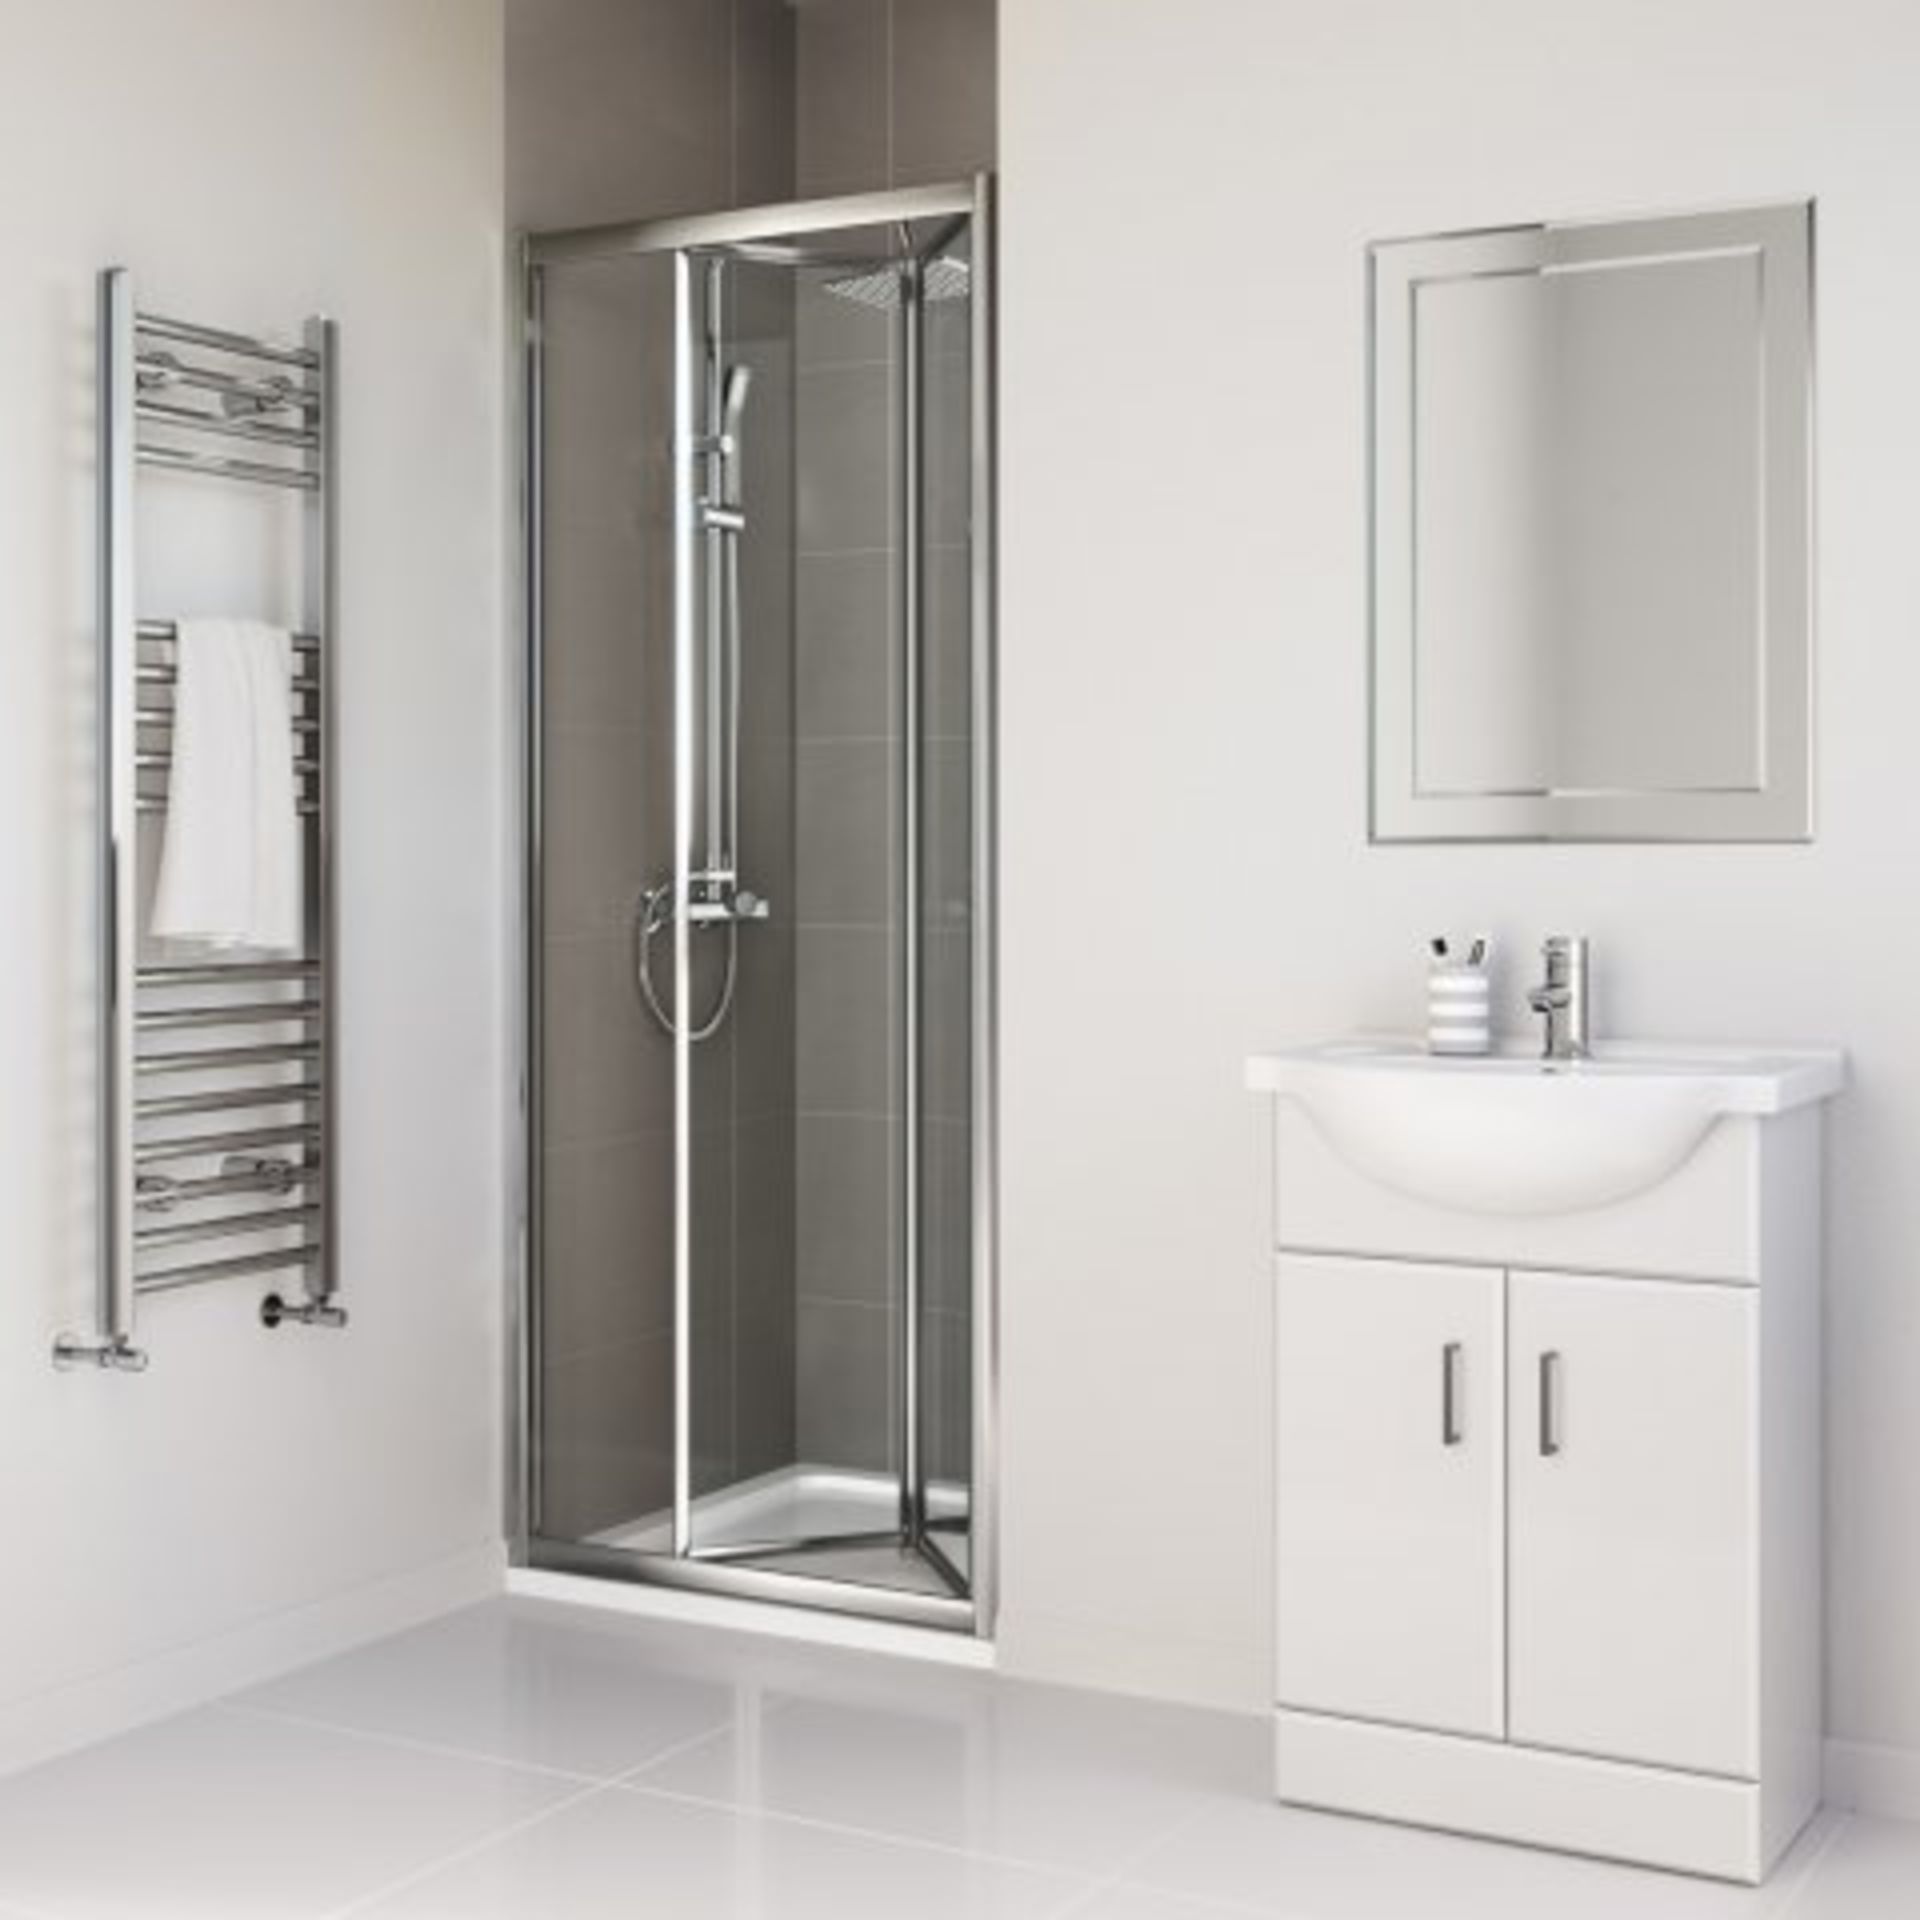 (Z65) 760mm - Elements Bi Fold Shower Door Do you have an awkward nook or a tricky recess in your - Image 4 of 5